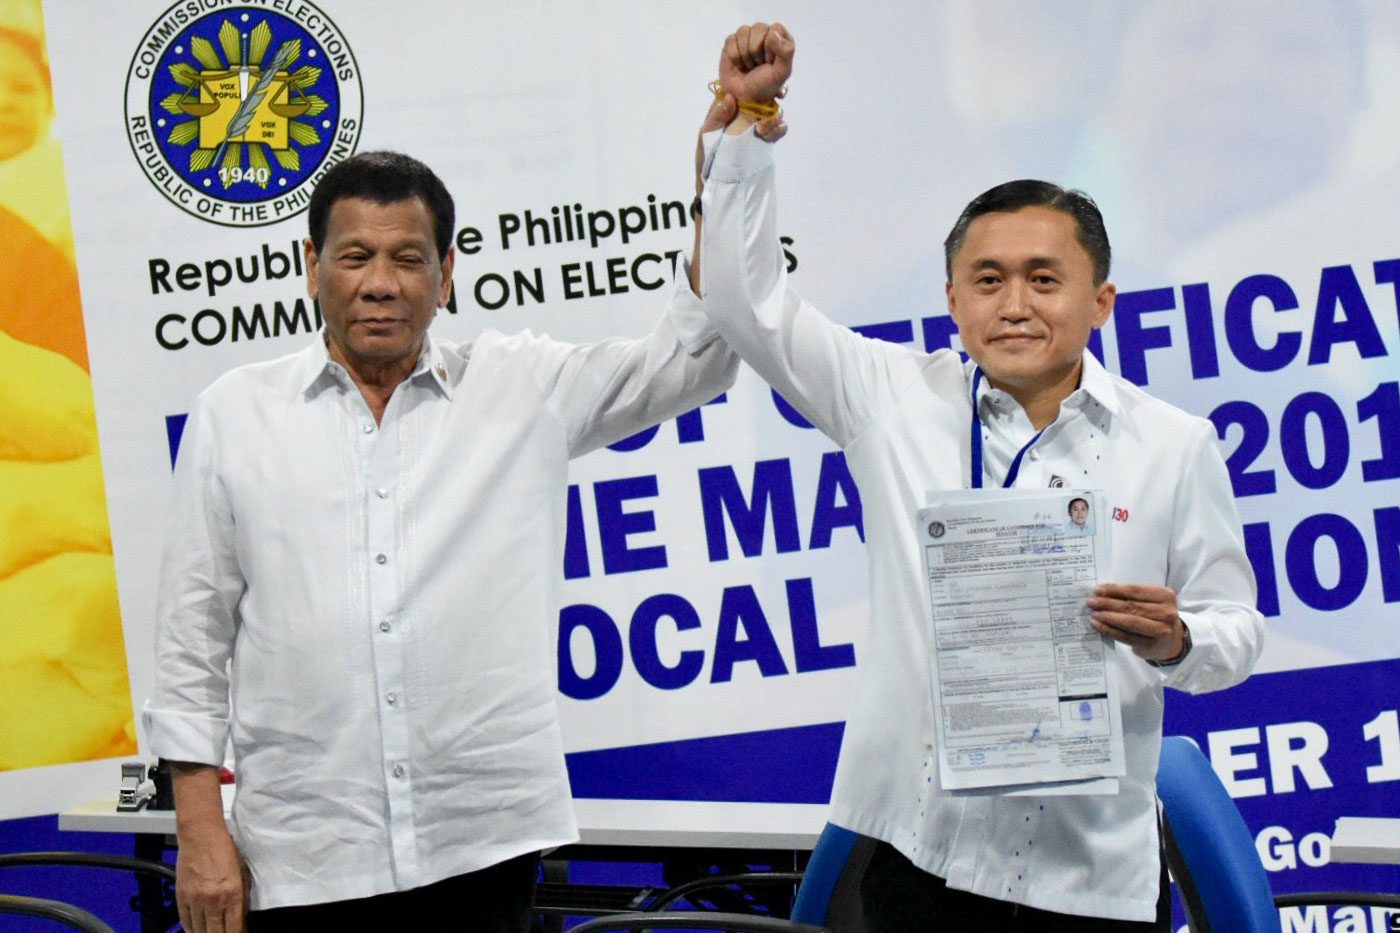 Duterte’s chosen ones: Who will benefit most from the President’s endorsement?